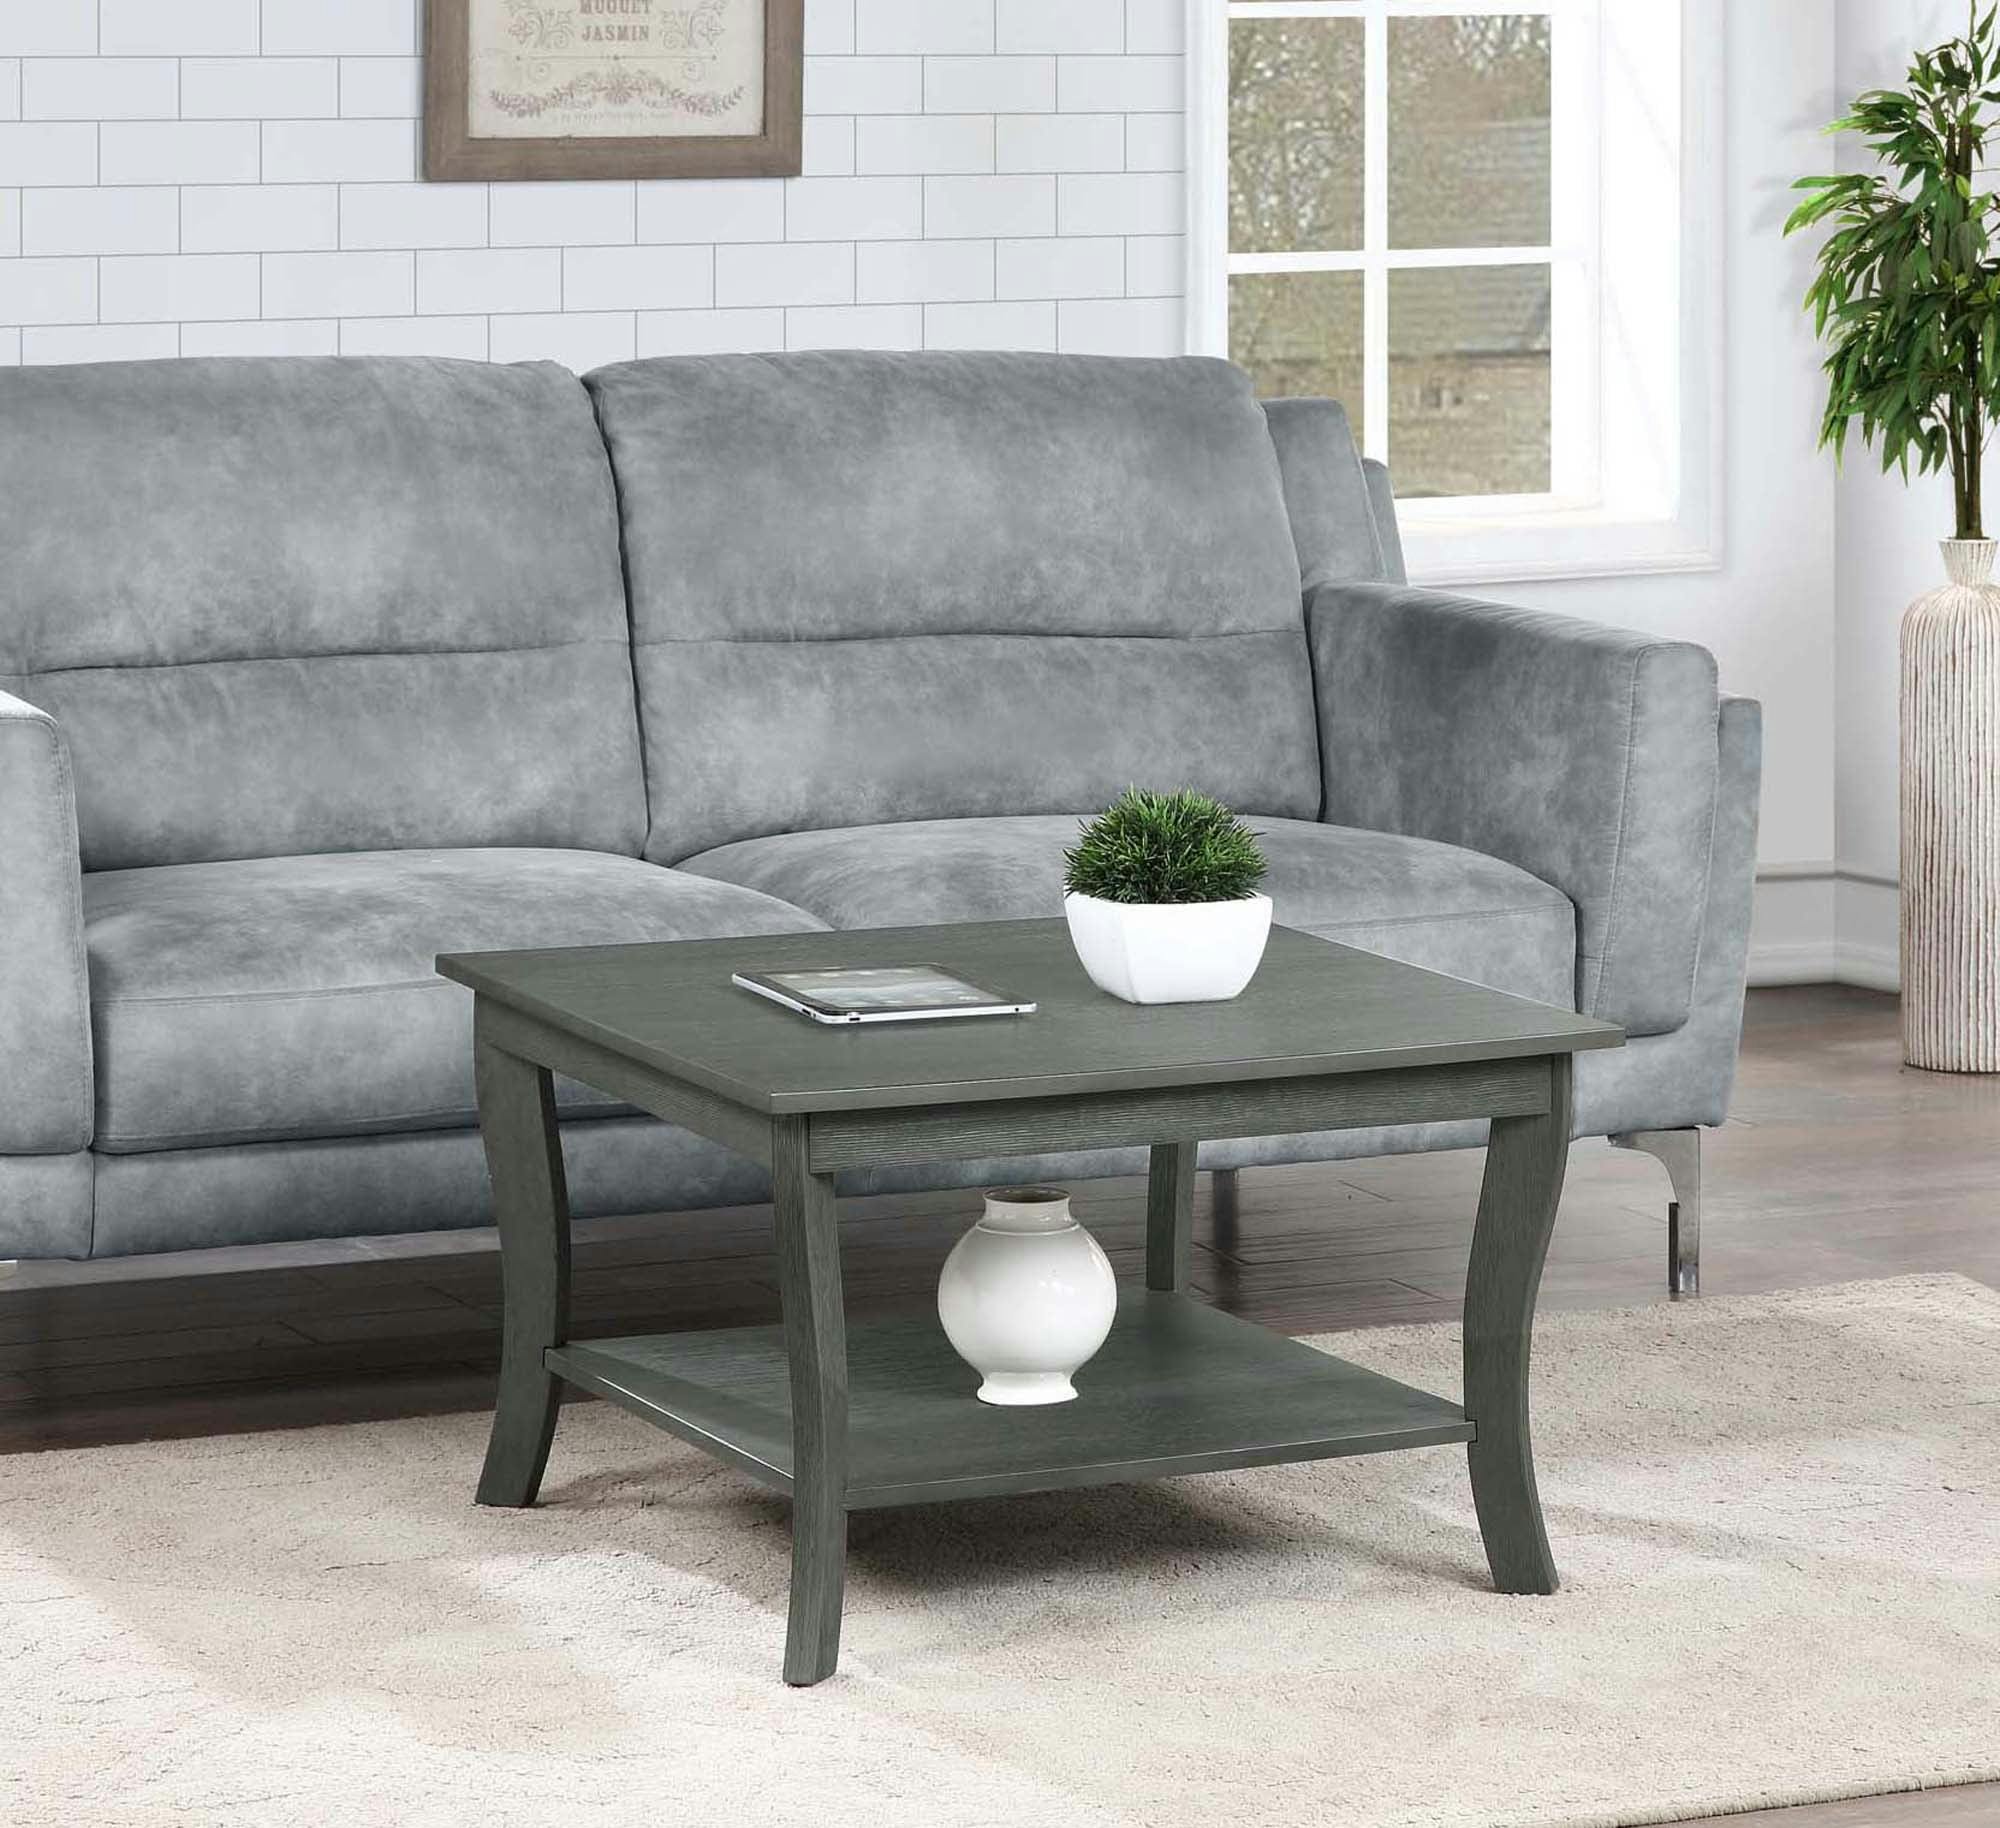 Heritage Square Wirebrush Gray Wood Coffee Table